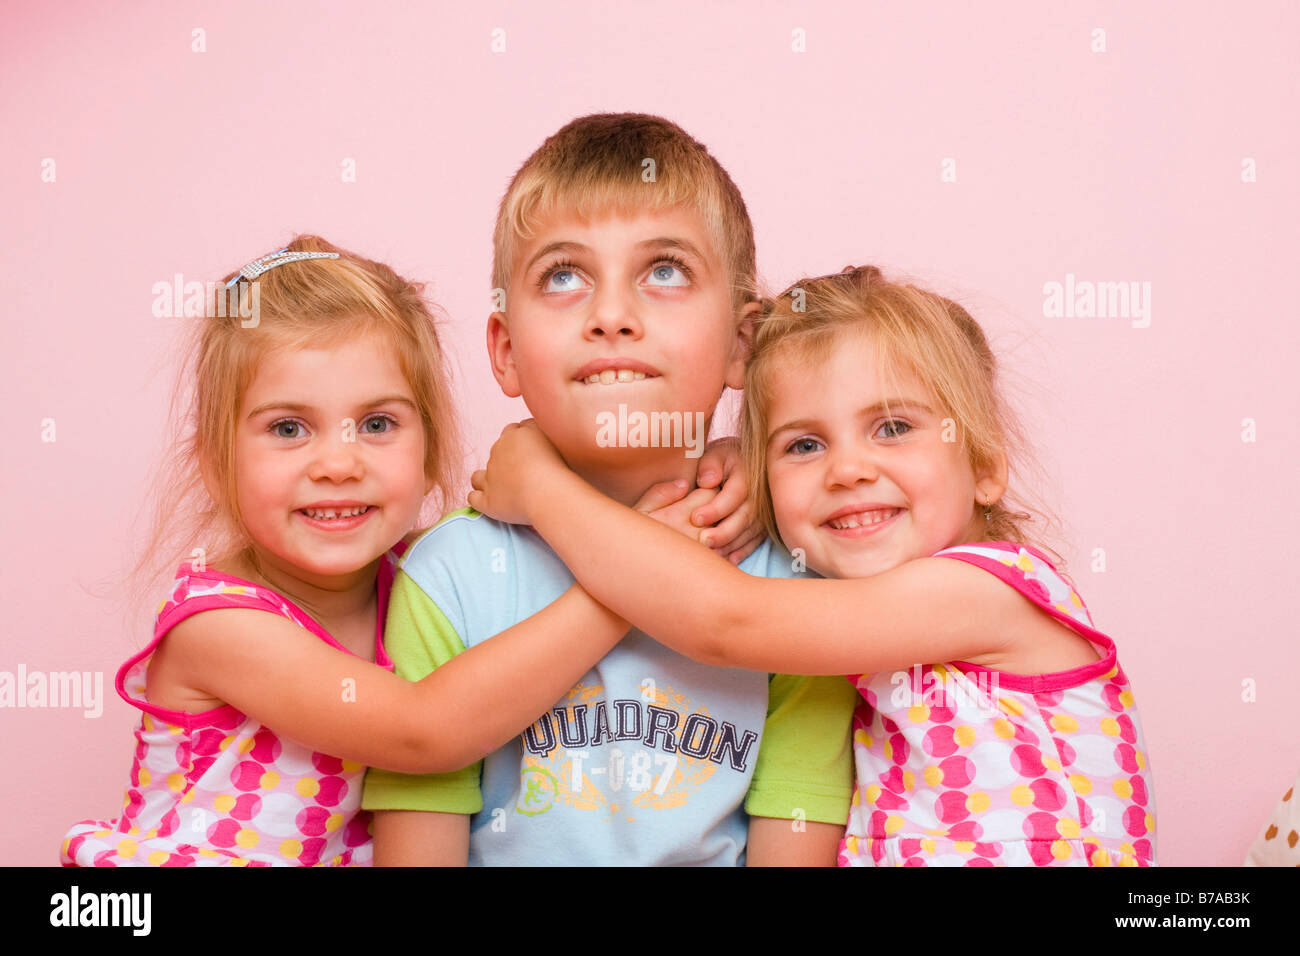 3 year old twin girls embracing a seven year old boy Stock Photo